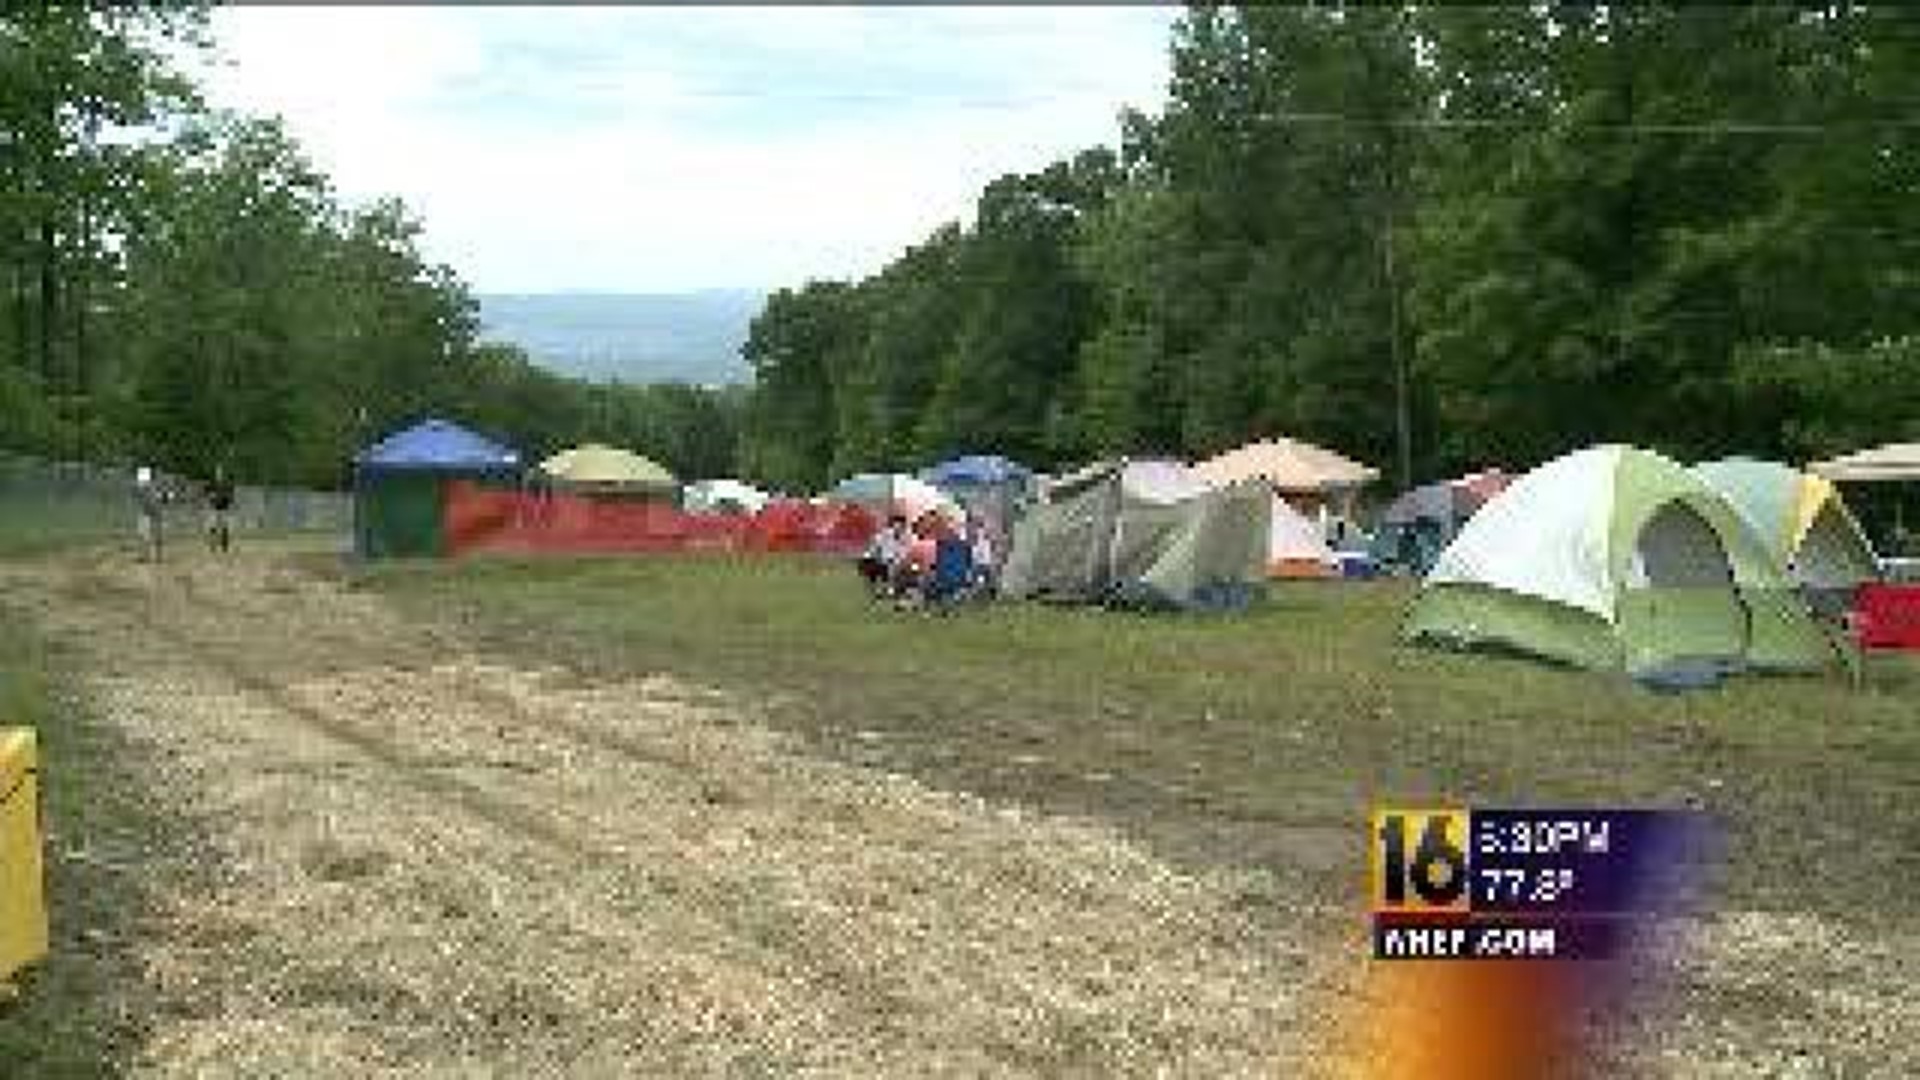 Campers Endure Wet Weather for Peach Music Festival